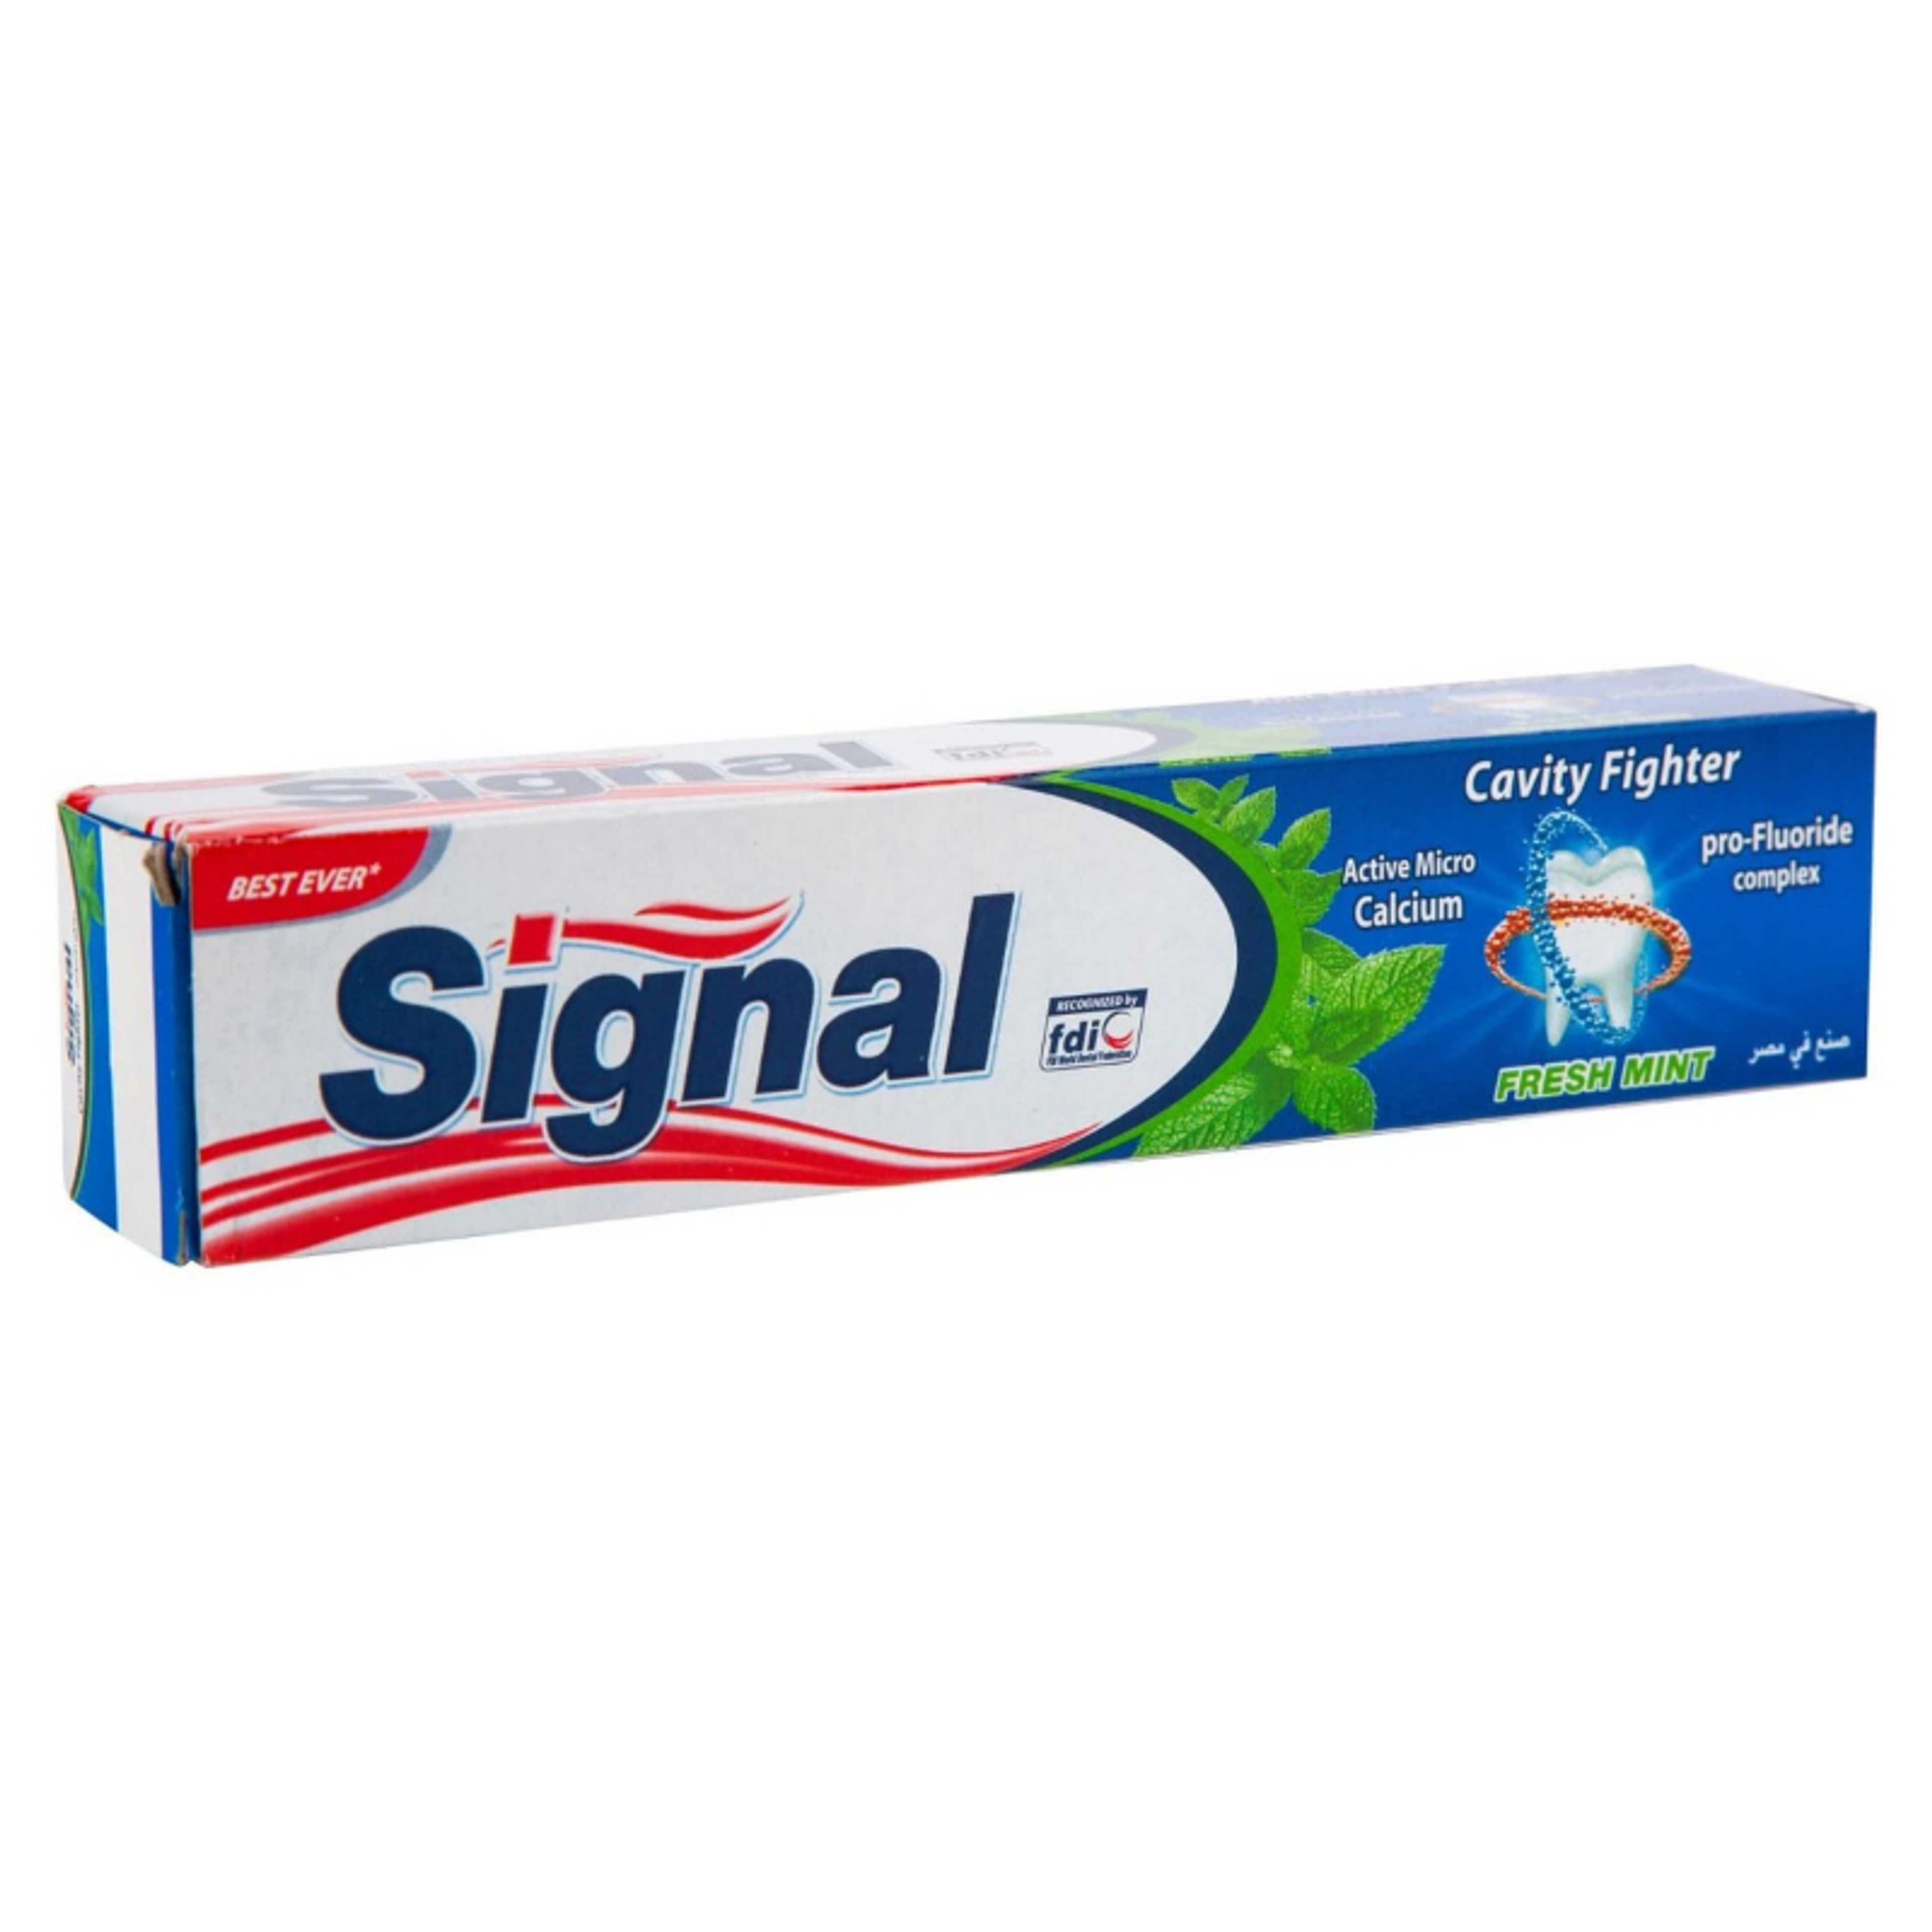 SIGNAL TOOTH PASTE CAVITY FIGHTER FRESH MINT 120ML